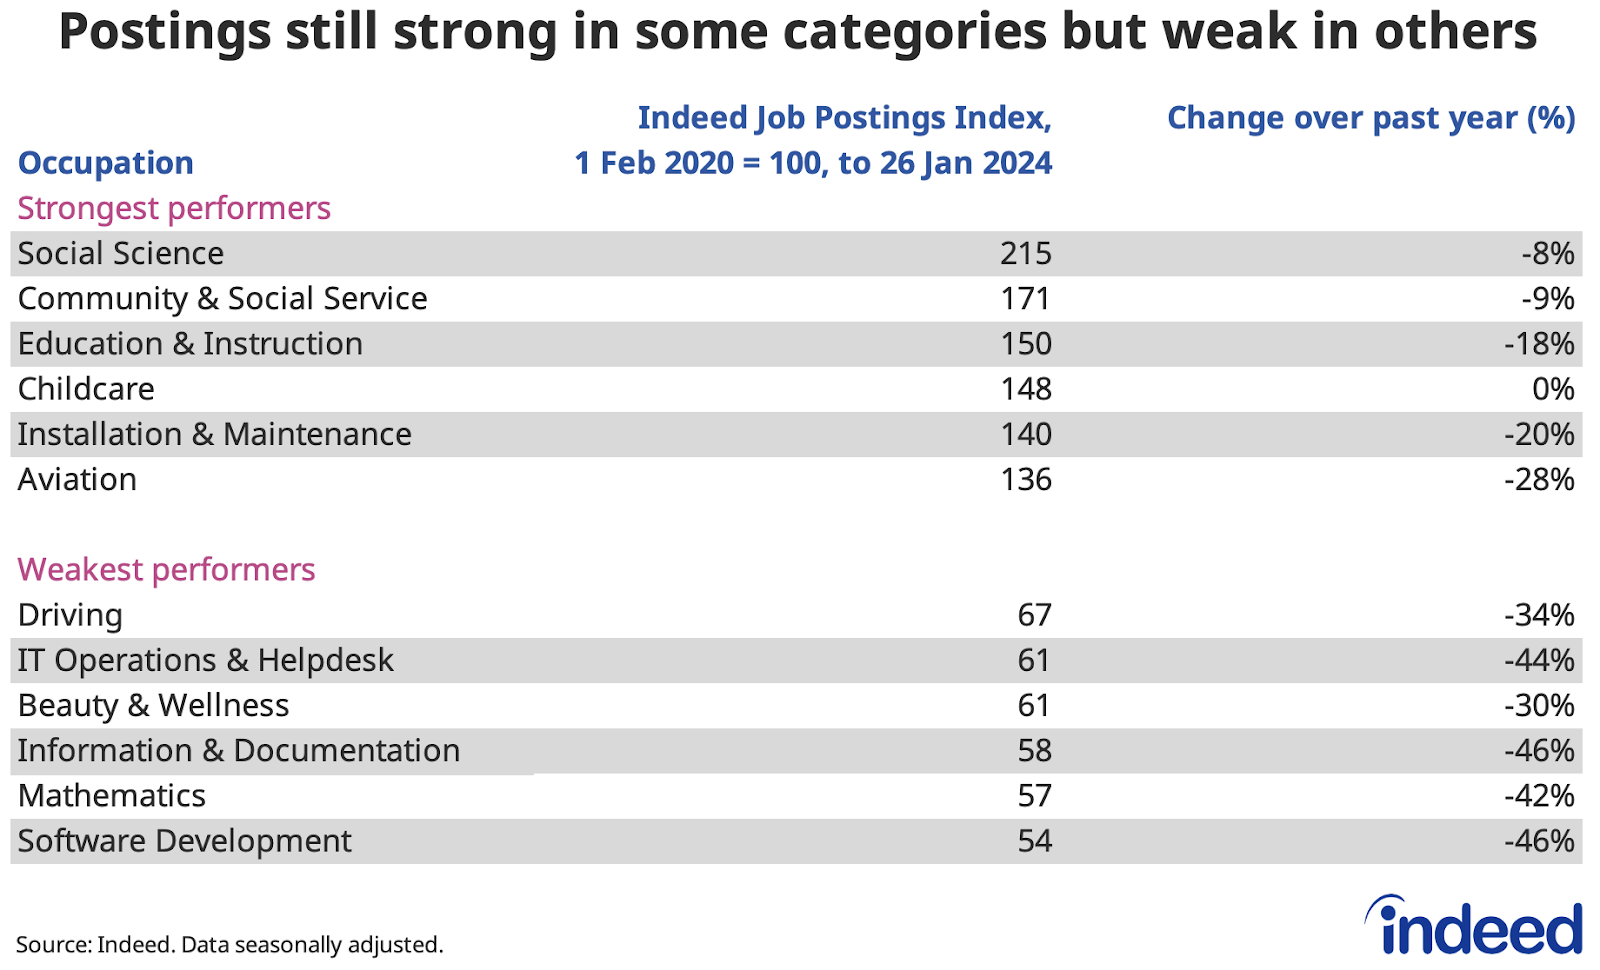 Table titled “Postings still strong in some categories but weak in others”, shows the strongest and weakest performing occupations for job postings changes versus their pre-pandemic level. Social science is the strongest performer, while software development is the weakest. 